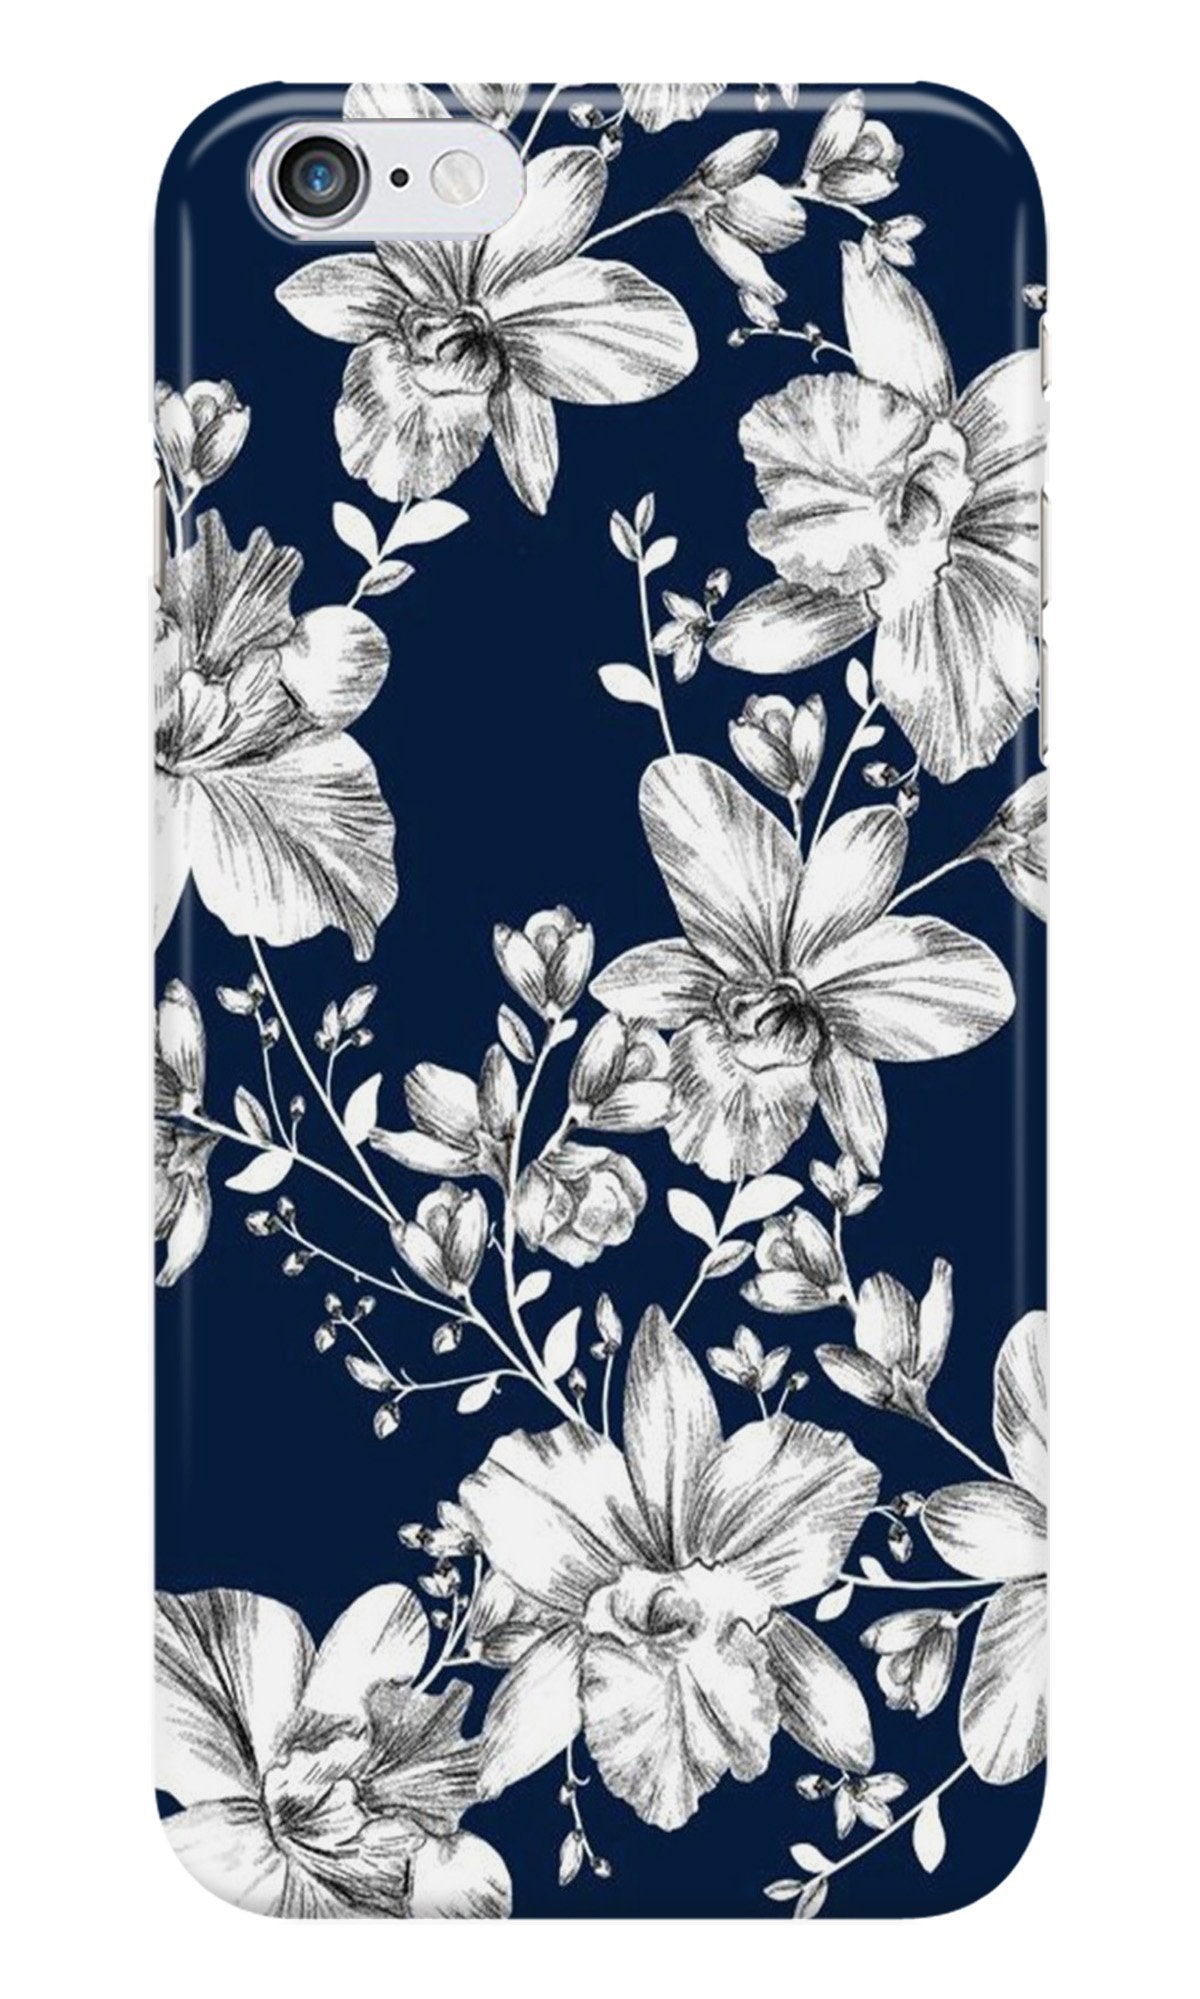 White flowers Blue Background Case for iPhone 6 Plus/ 6s Plus